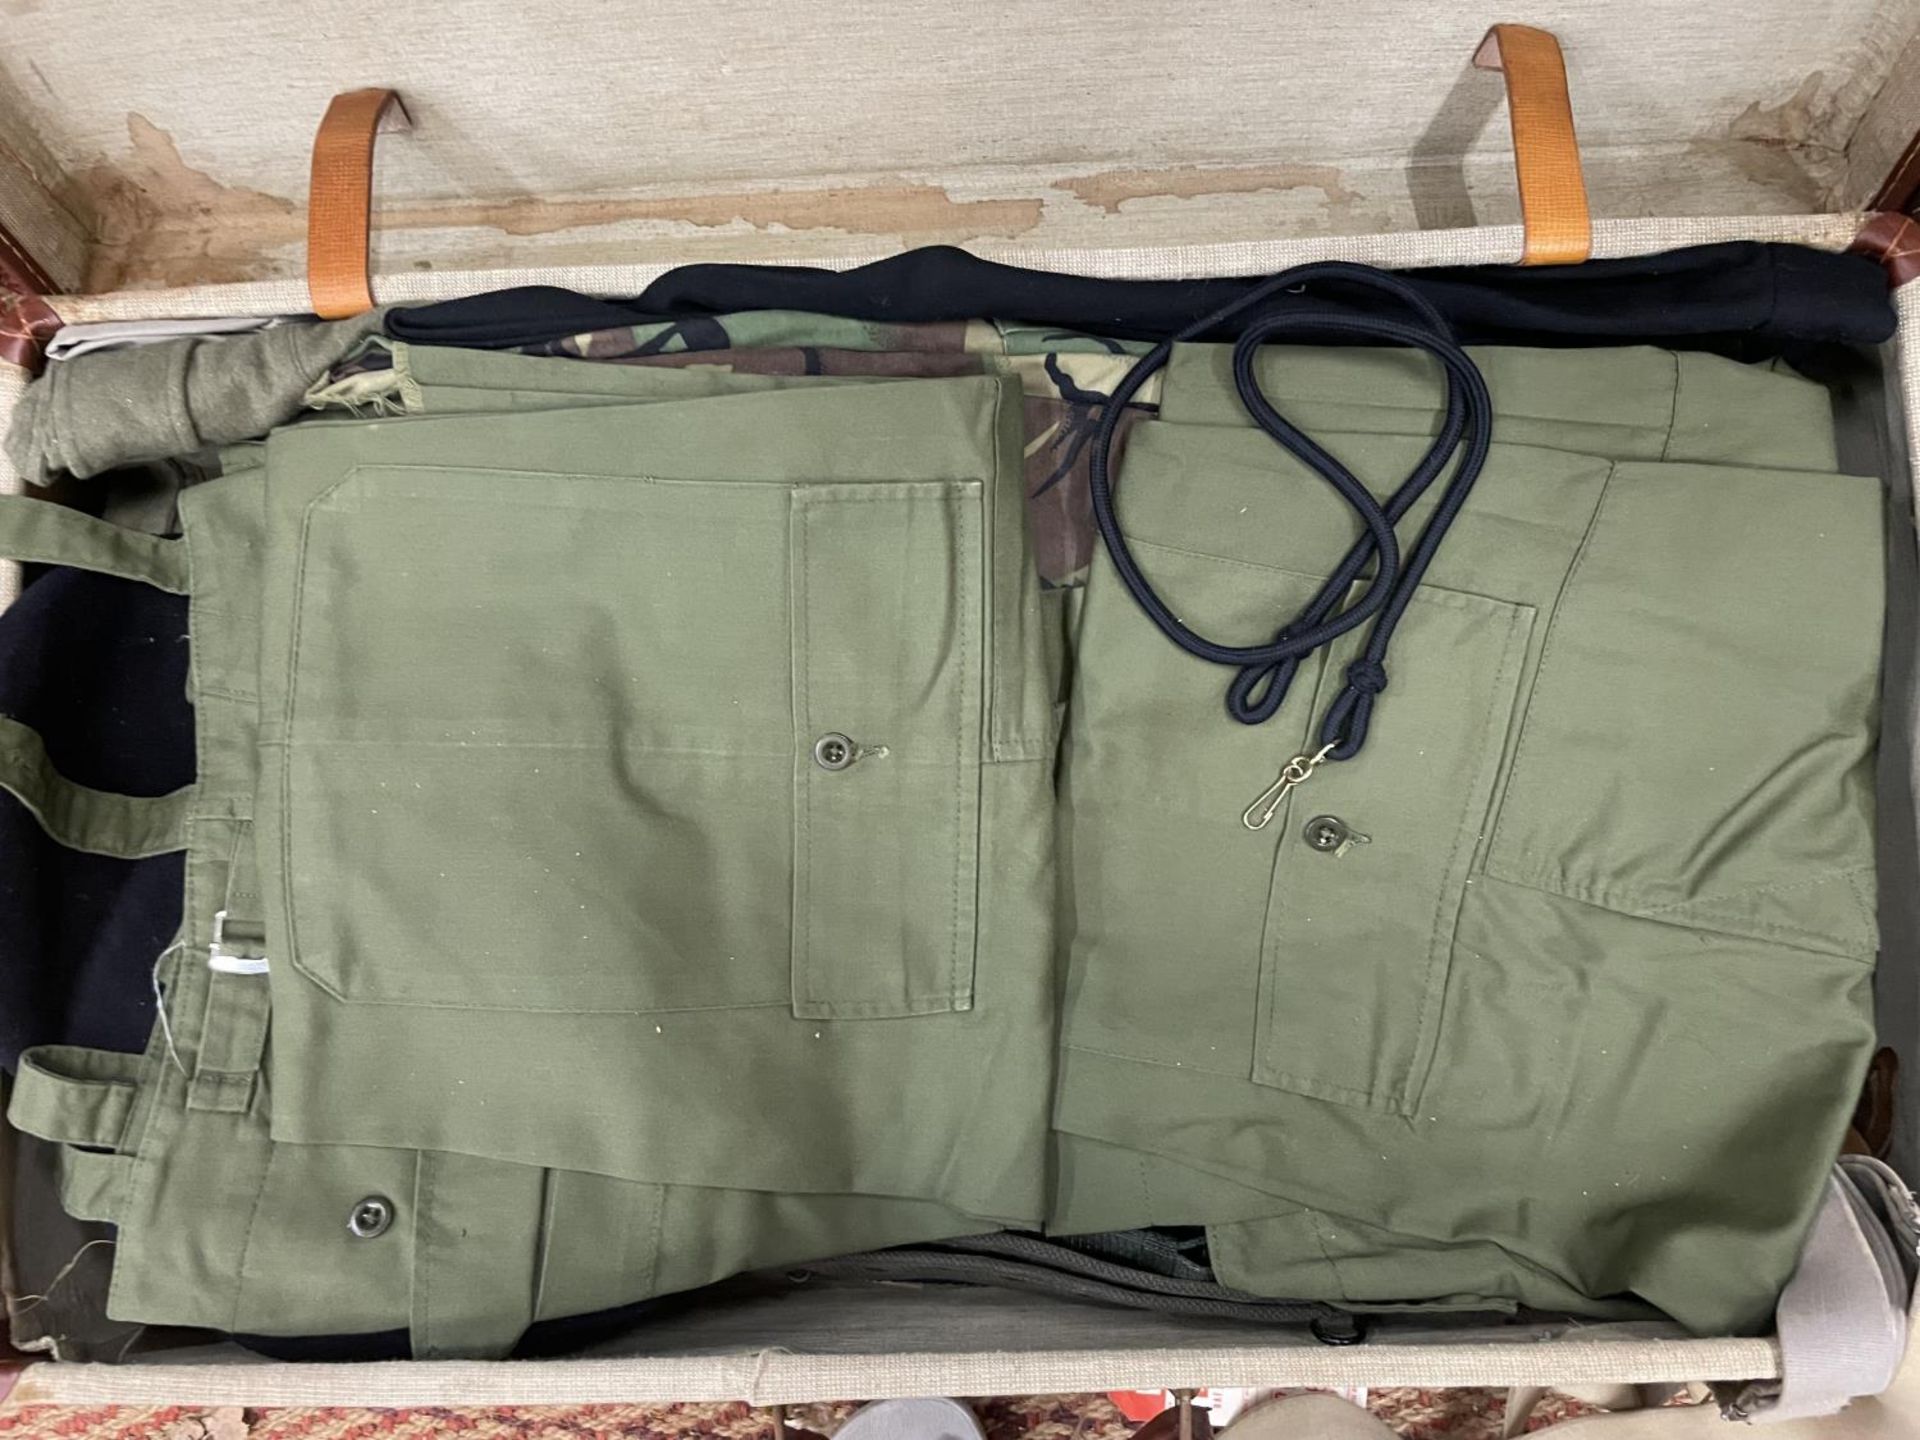 TWO SUITCASES CONTAINING A LARGE QUANTITY OF BRITISH ARMY UNIFORMS, CAMOUFLAGE ITEMS ETC - Image 3 of 5